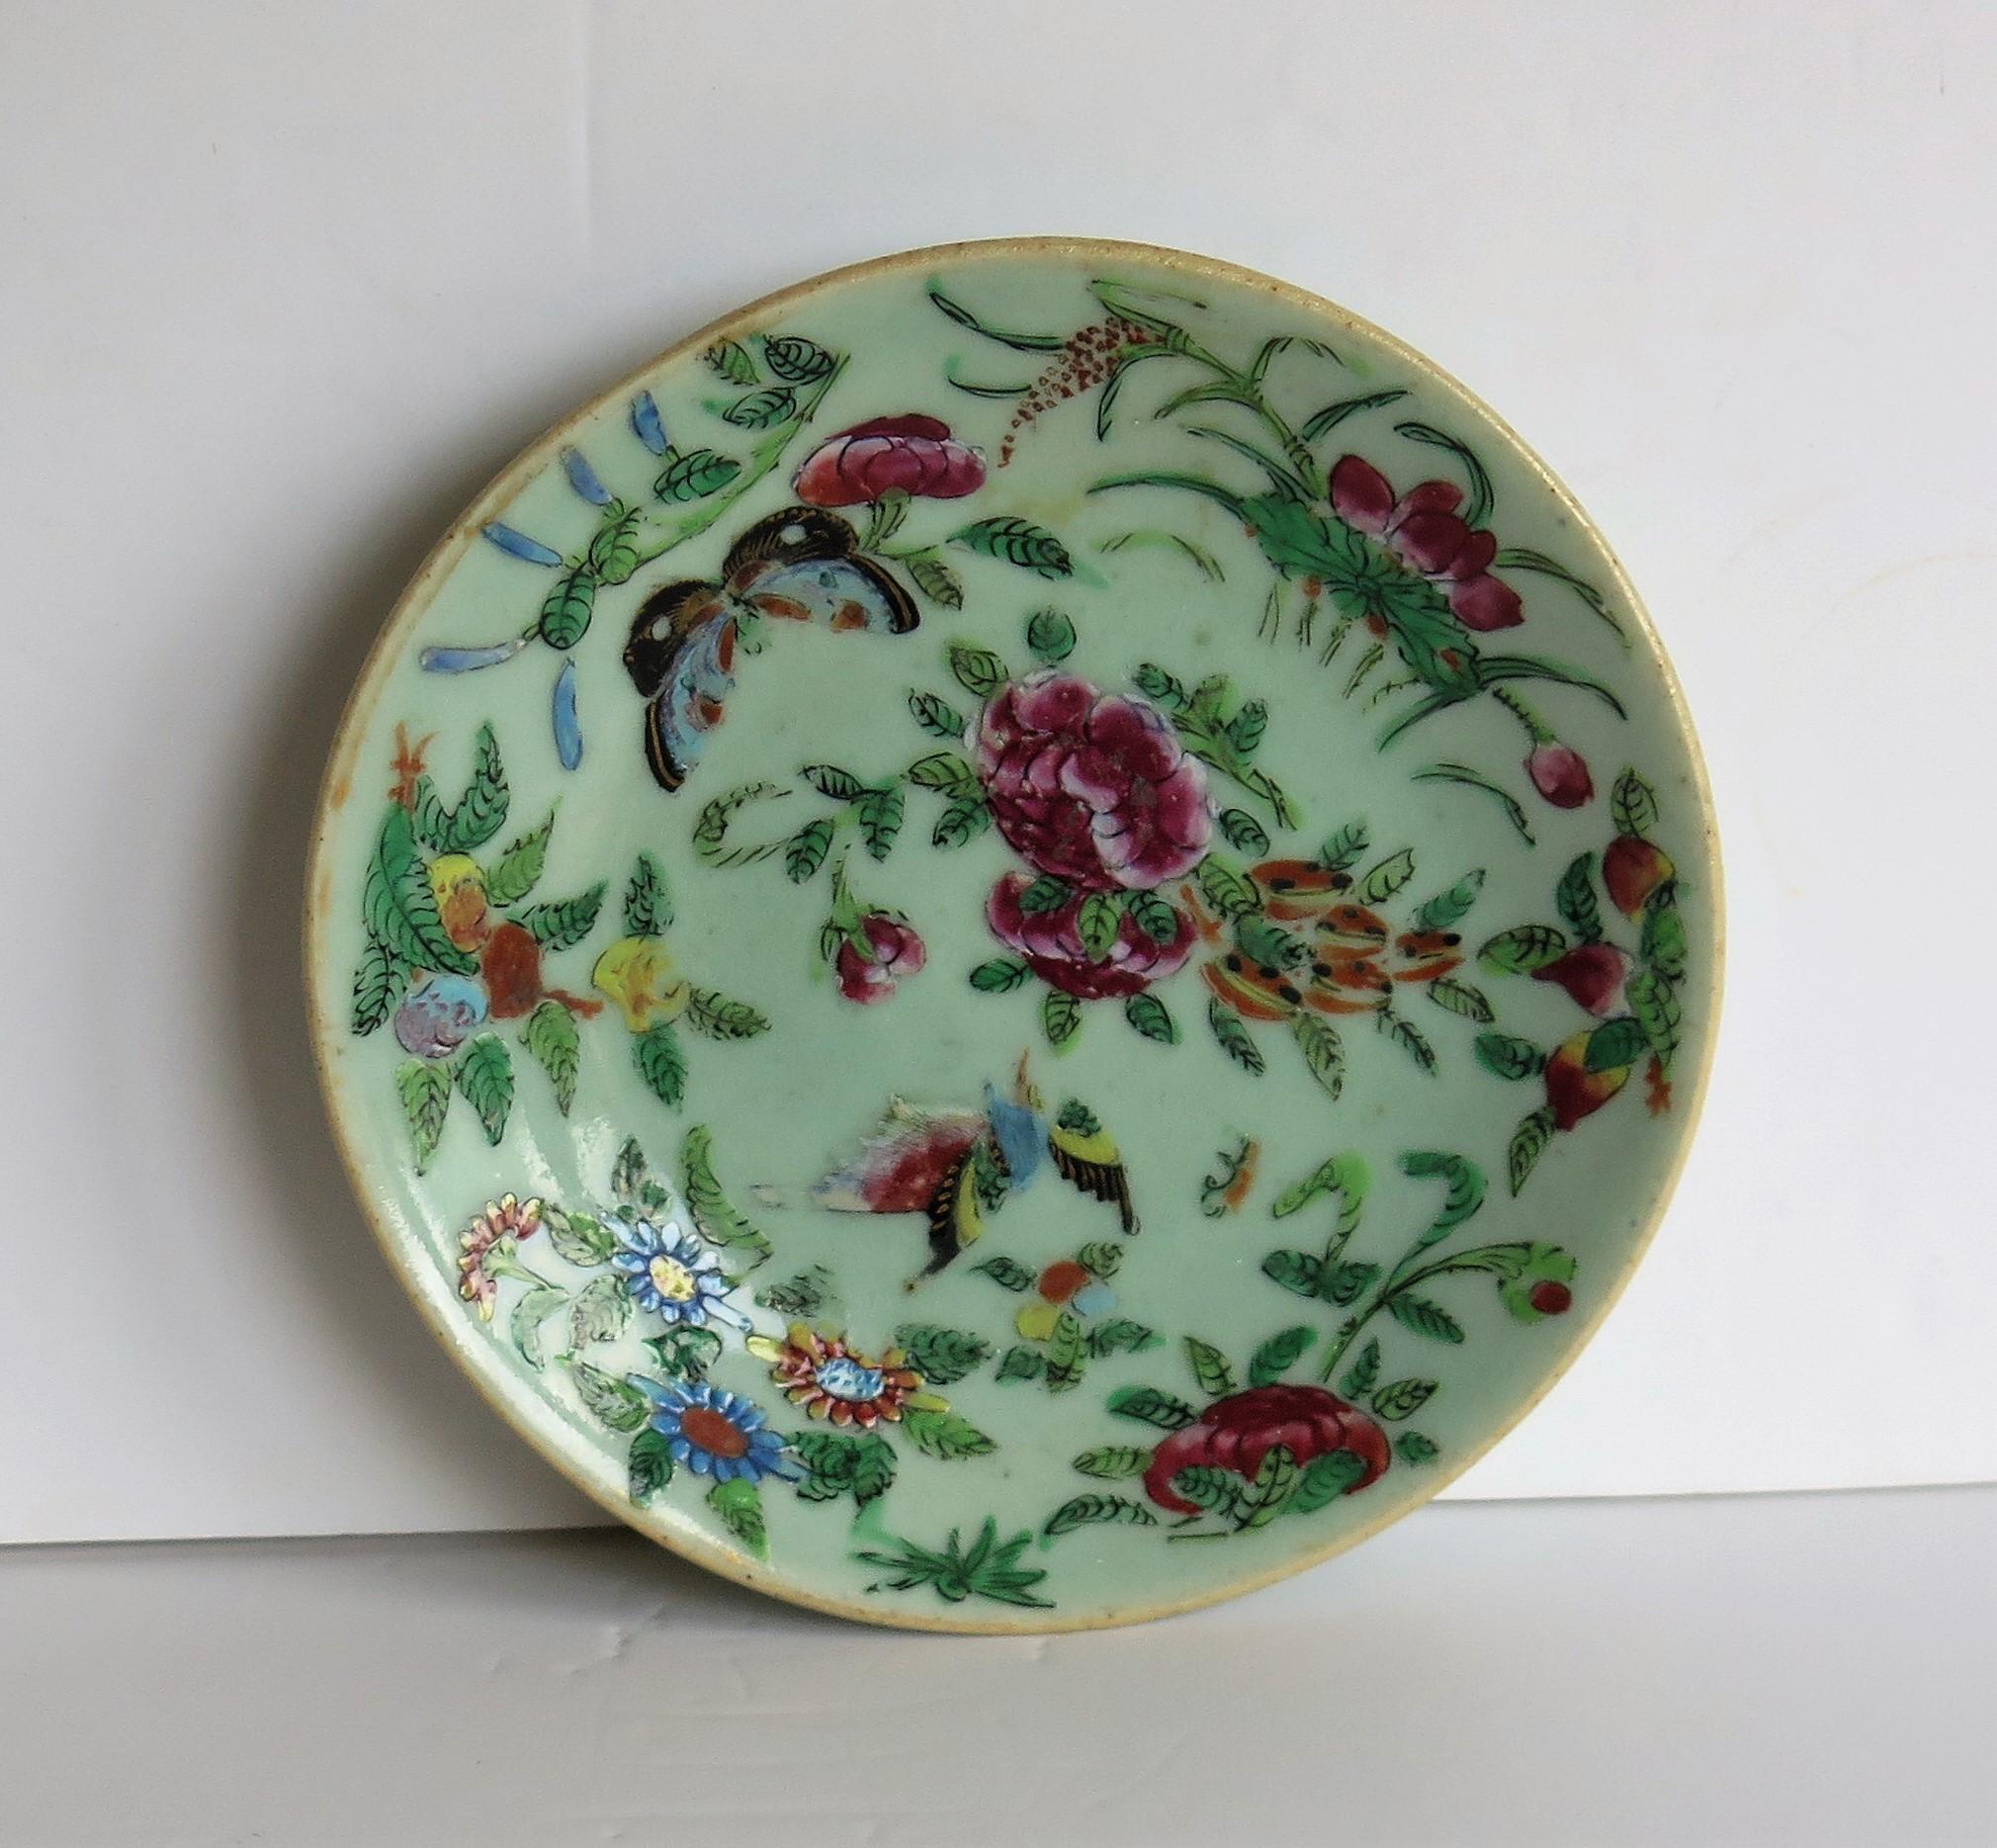 This is a good 19th century Chinese Export, (Canton) small plate or dish, which we date to the early 19th century, circa 1820 of the Qing dynasty.

The plate has a light green, Celadon ground glaze with beautifully hand painted decoration, in